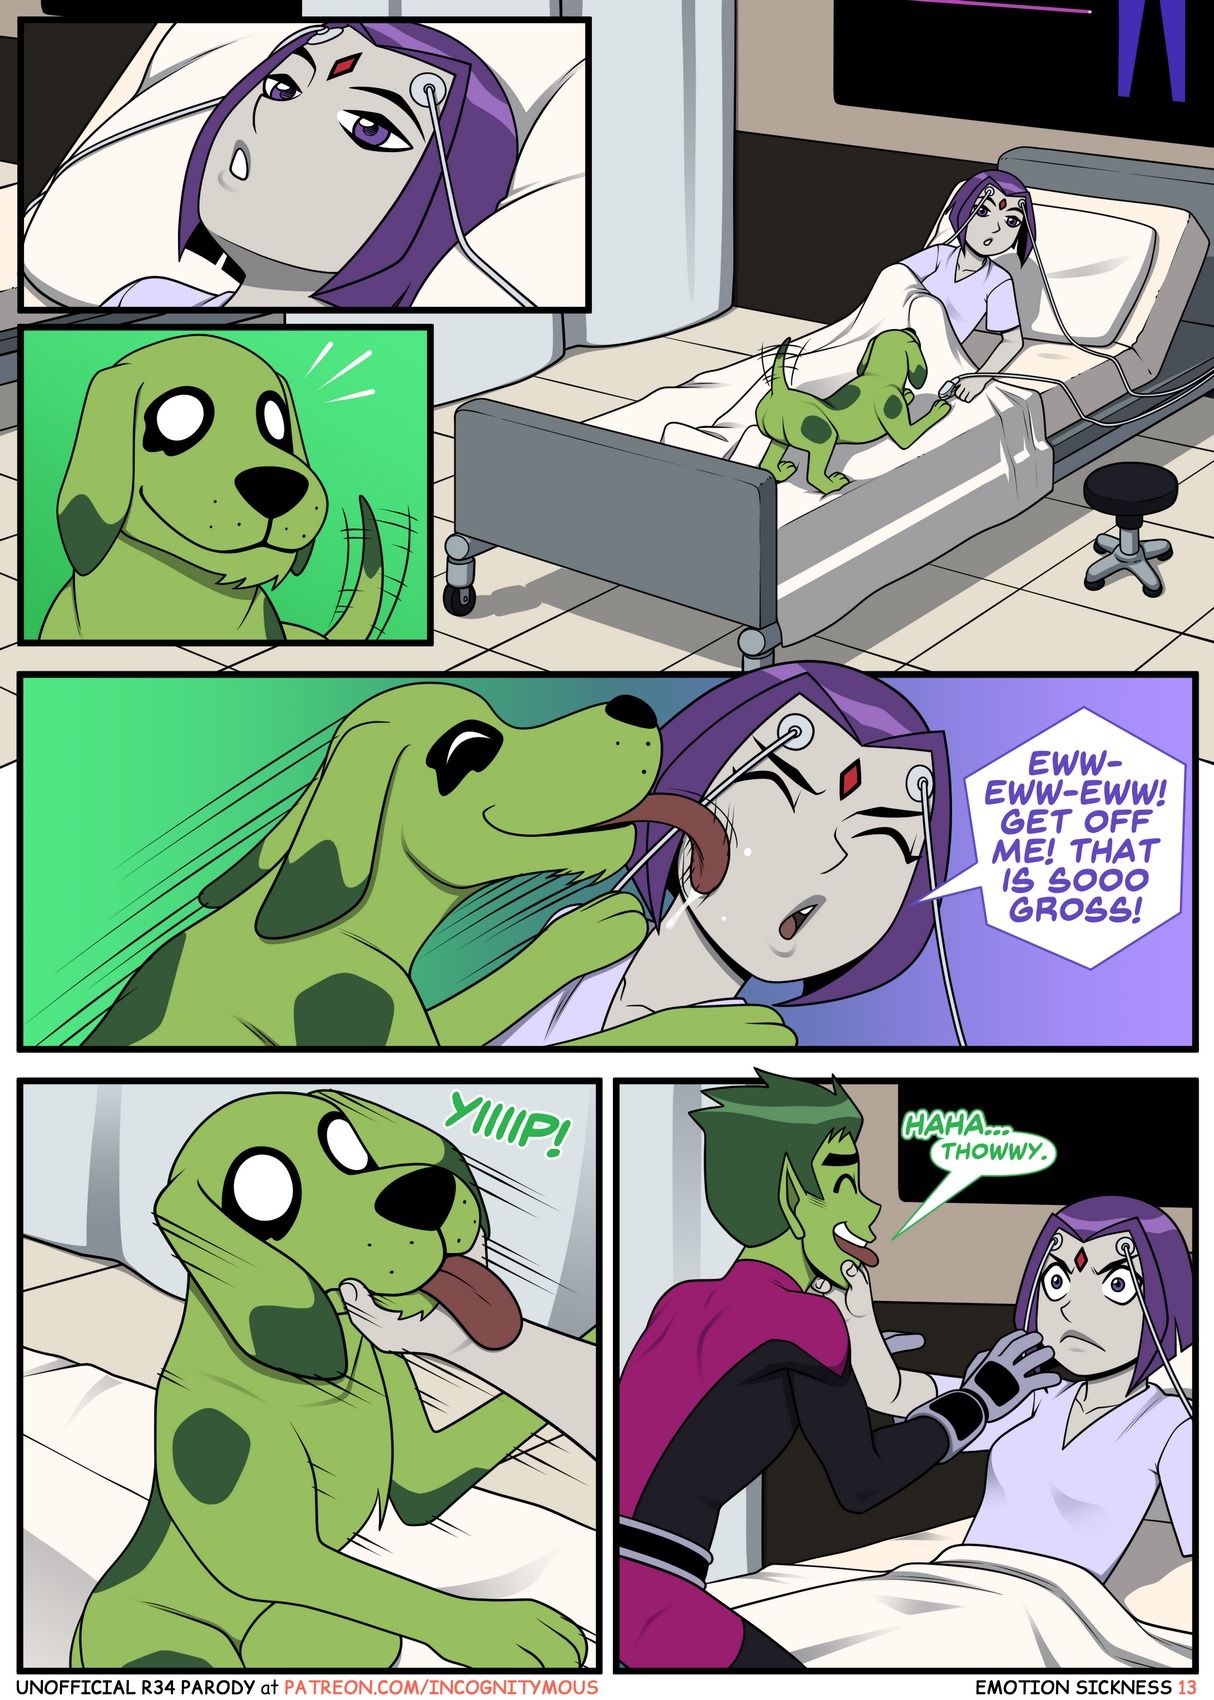 Teen Titans - Emotion Sickness (Incognitymous) page 25